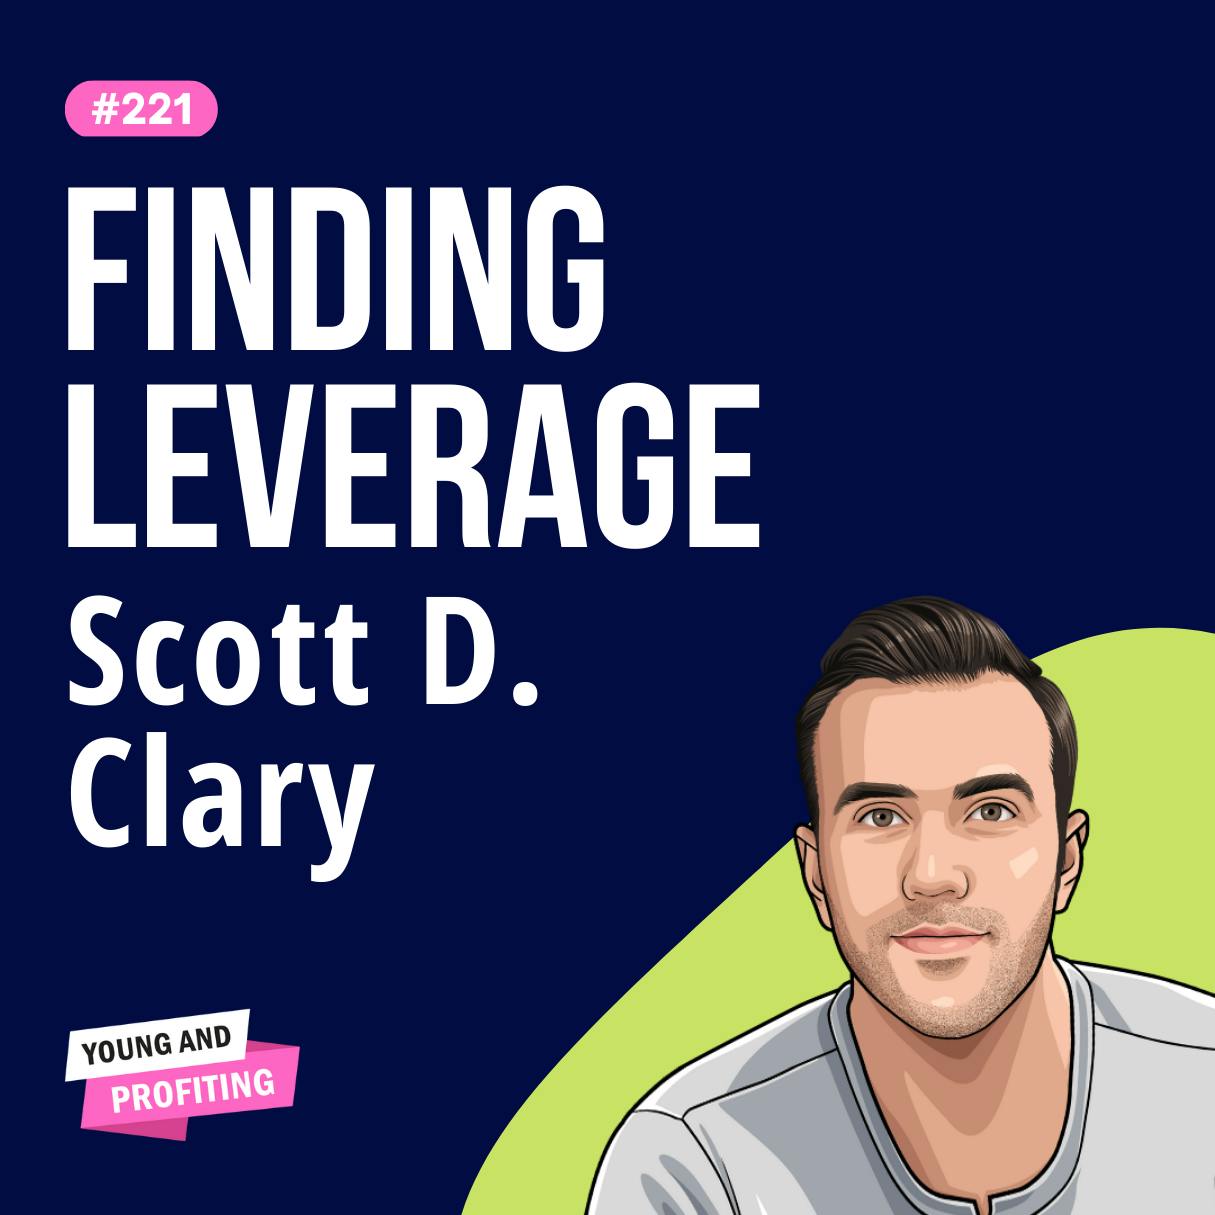 Scott D. Clary: Overcoming Imposter Syndrome, Getting Started in Entrepreneurship, and Finding Product Market Fit | E221 | Part 1